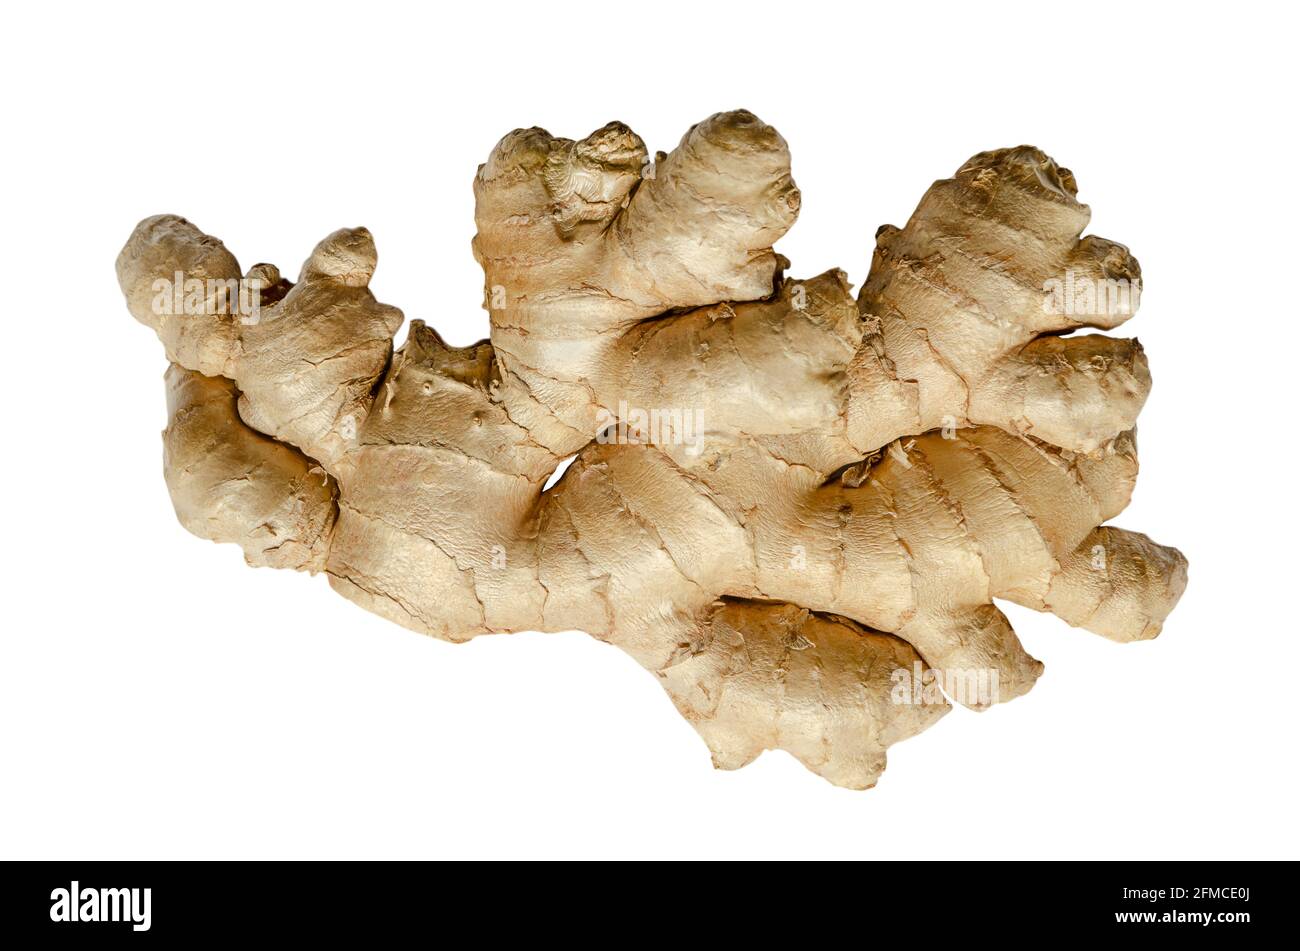 Fresh ginger root, from above, isolated on white background. Juicy and fleshy rhizome of Zingiber officinale, used as fragrant kitchen spice. Stock Photo